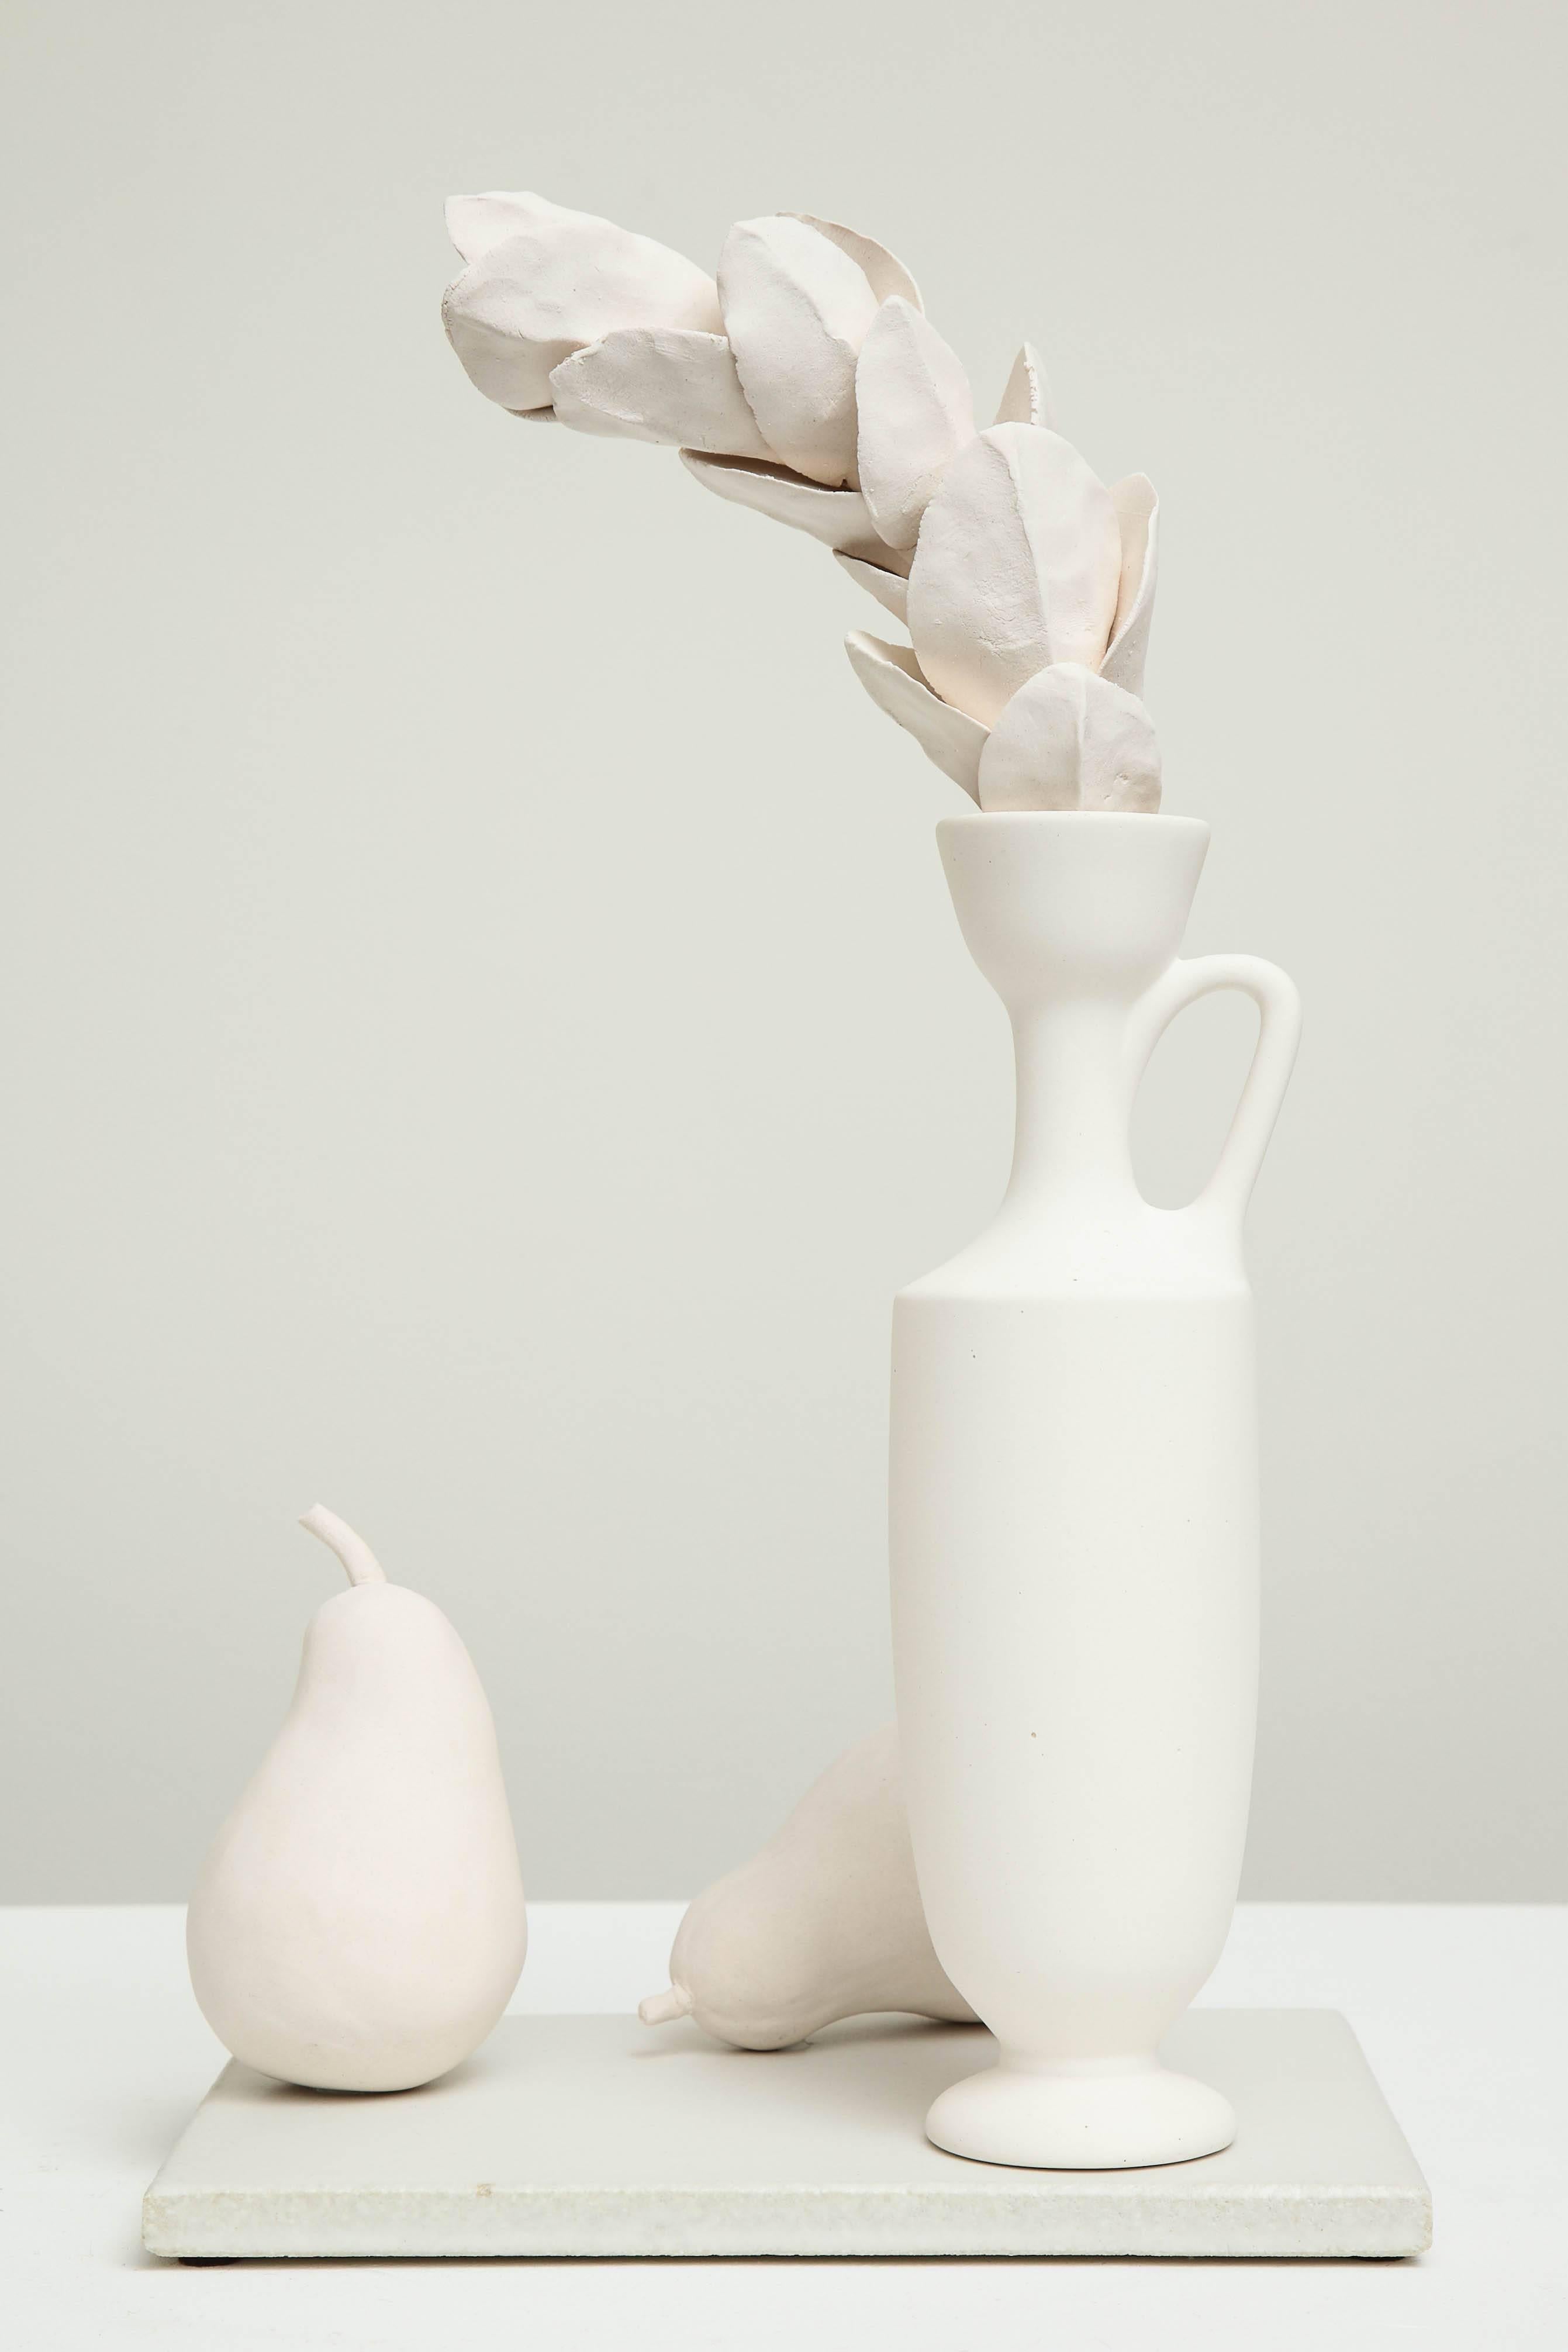 Porcelain Still Life in White with Lekythos, Branch, and Two Pears by Anat Shiftan, 2017